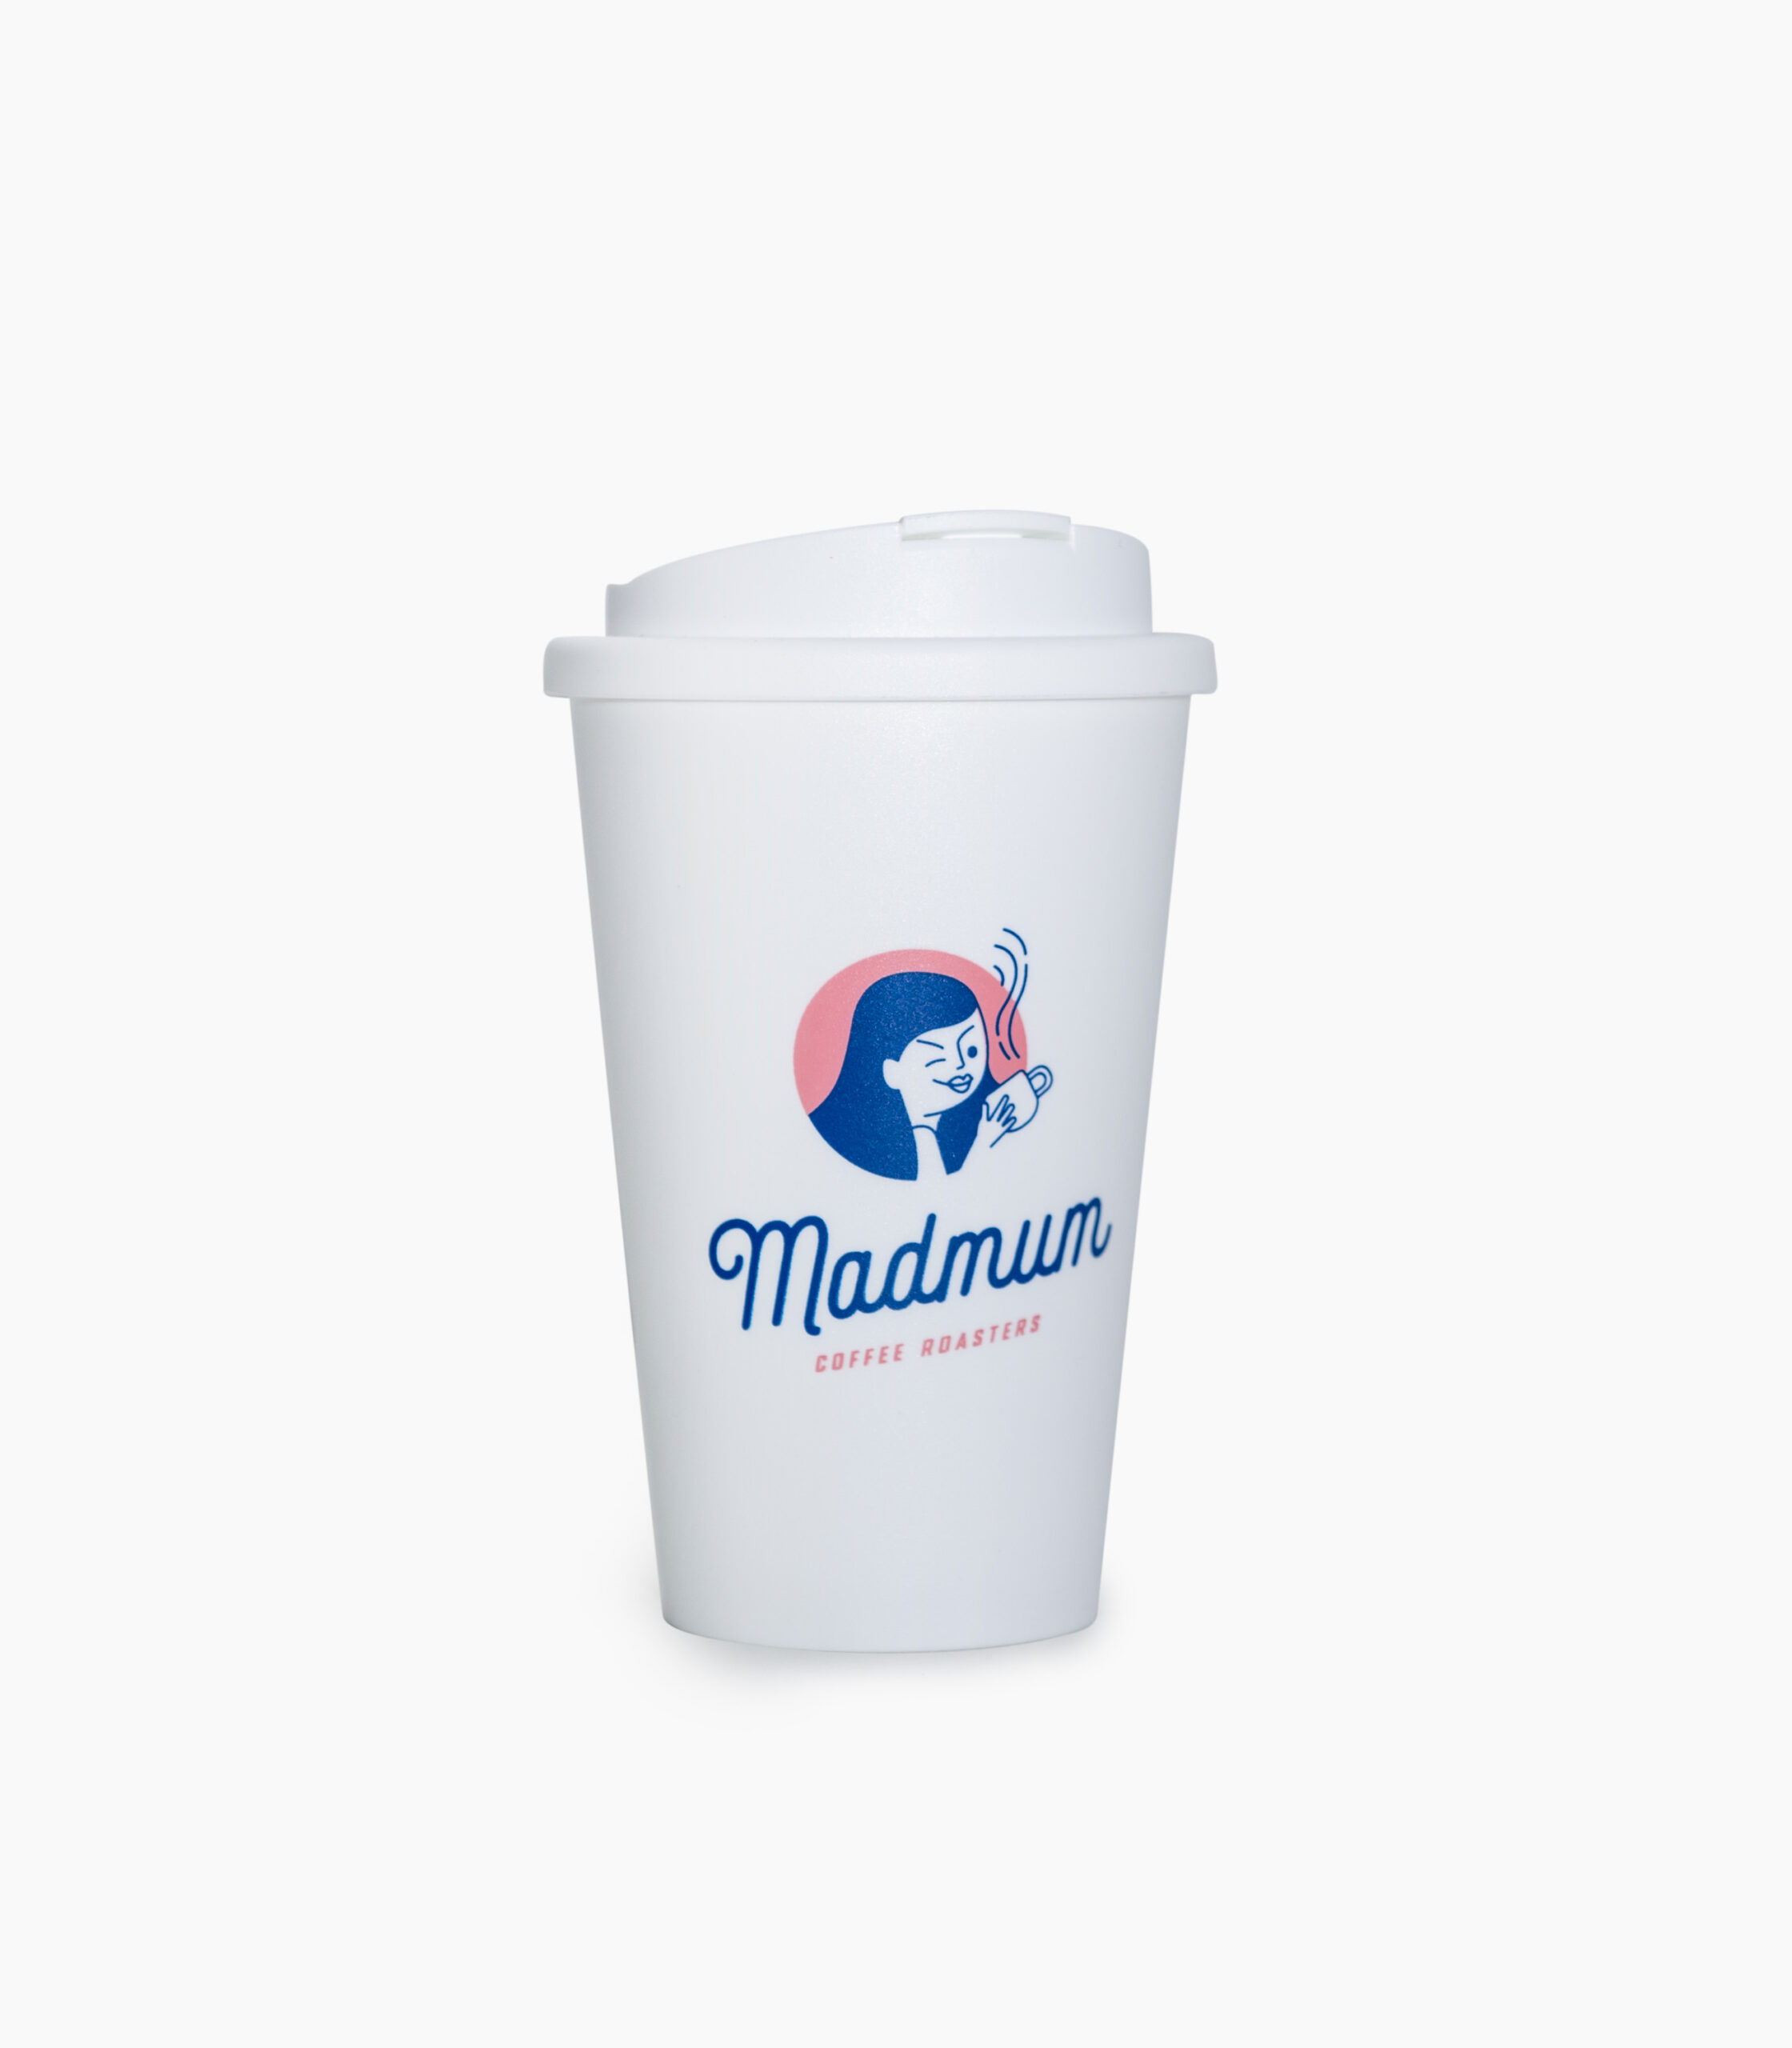 Madmums's to go cup